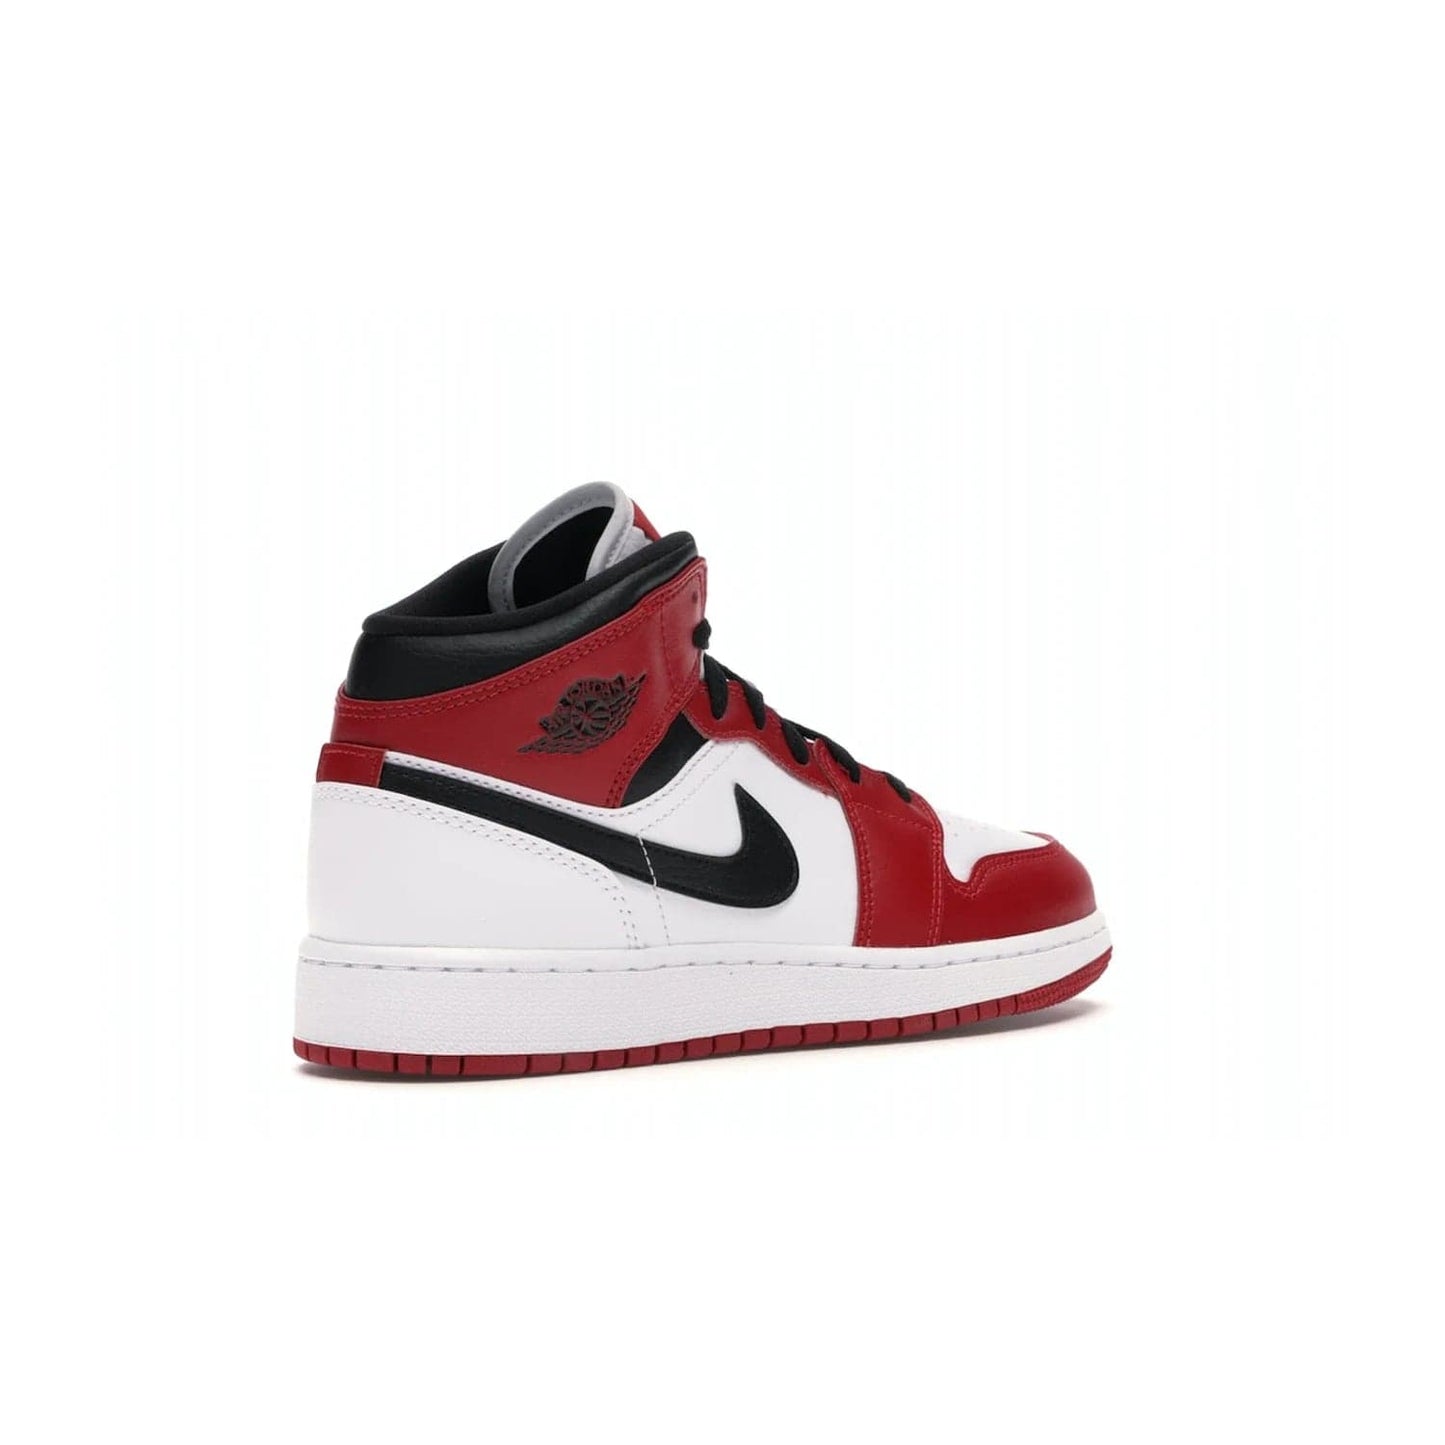 Jordan 1 Mid Chicago (2020) (GS) - Image 33 - Only at www.BallersClubKickz.com - The Kids Air Jordan 1 Mid Chicago 2020 is a stylish sneaker with classic Jordan features. White, red and black color scheme with iconic Wings and Swoosh logos, padded ankle support, white midsole with Air tech and black cotton laces. Sure to become an instant classic. July 2020 release.